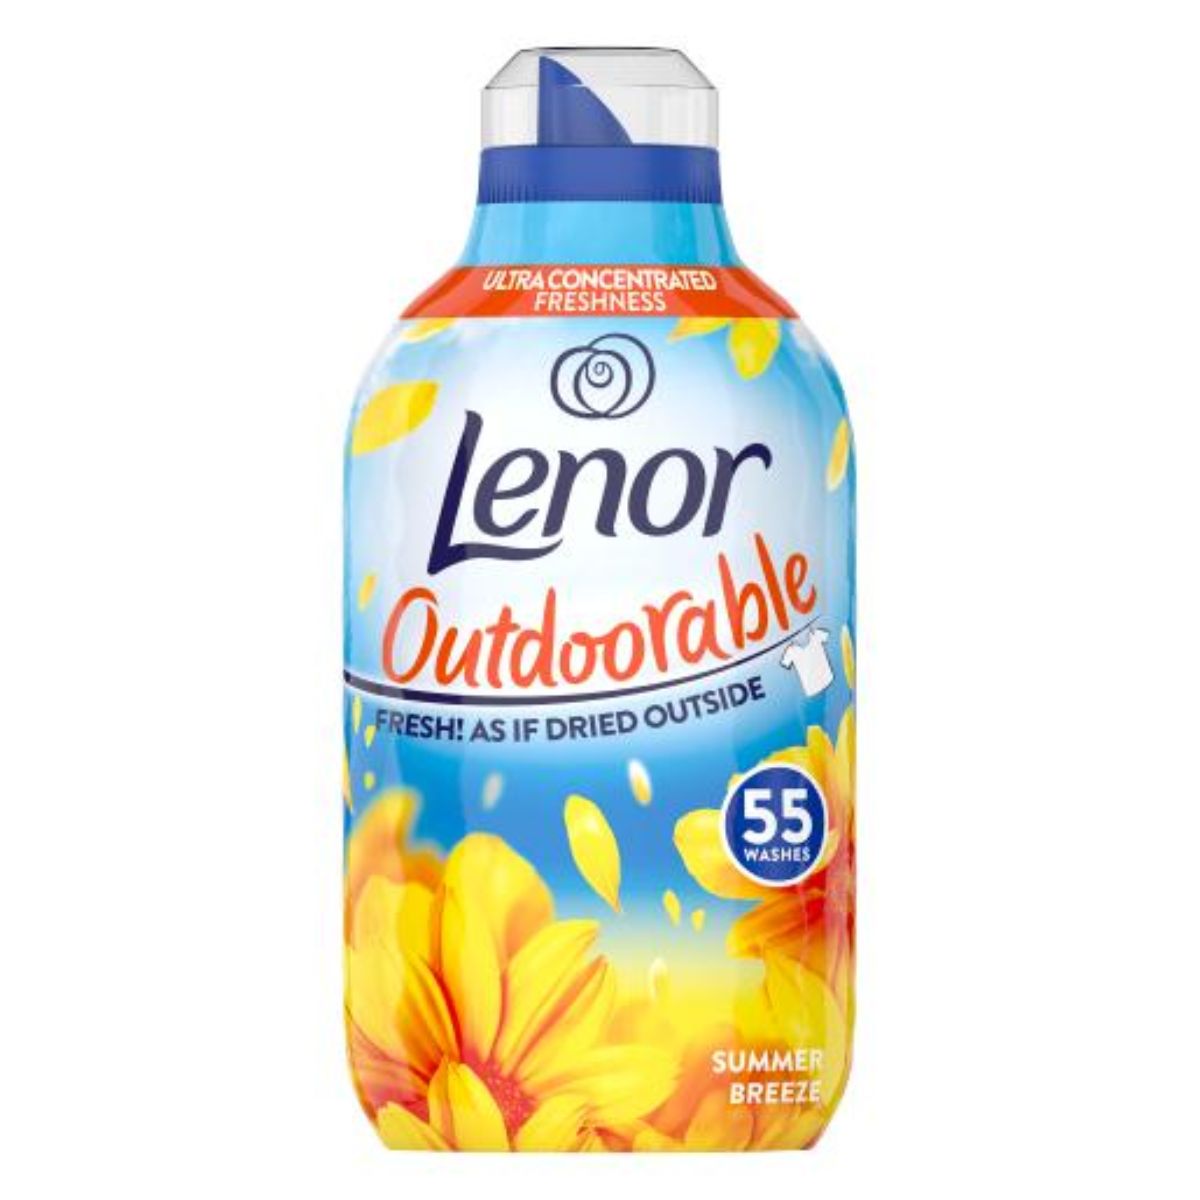 A bottle of Lenor - Outdoorable Fabric Conditioner Summer Breeze, claiming to offer the freshness of outdoor drying.